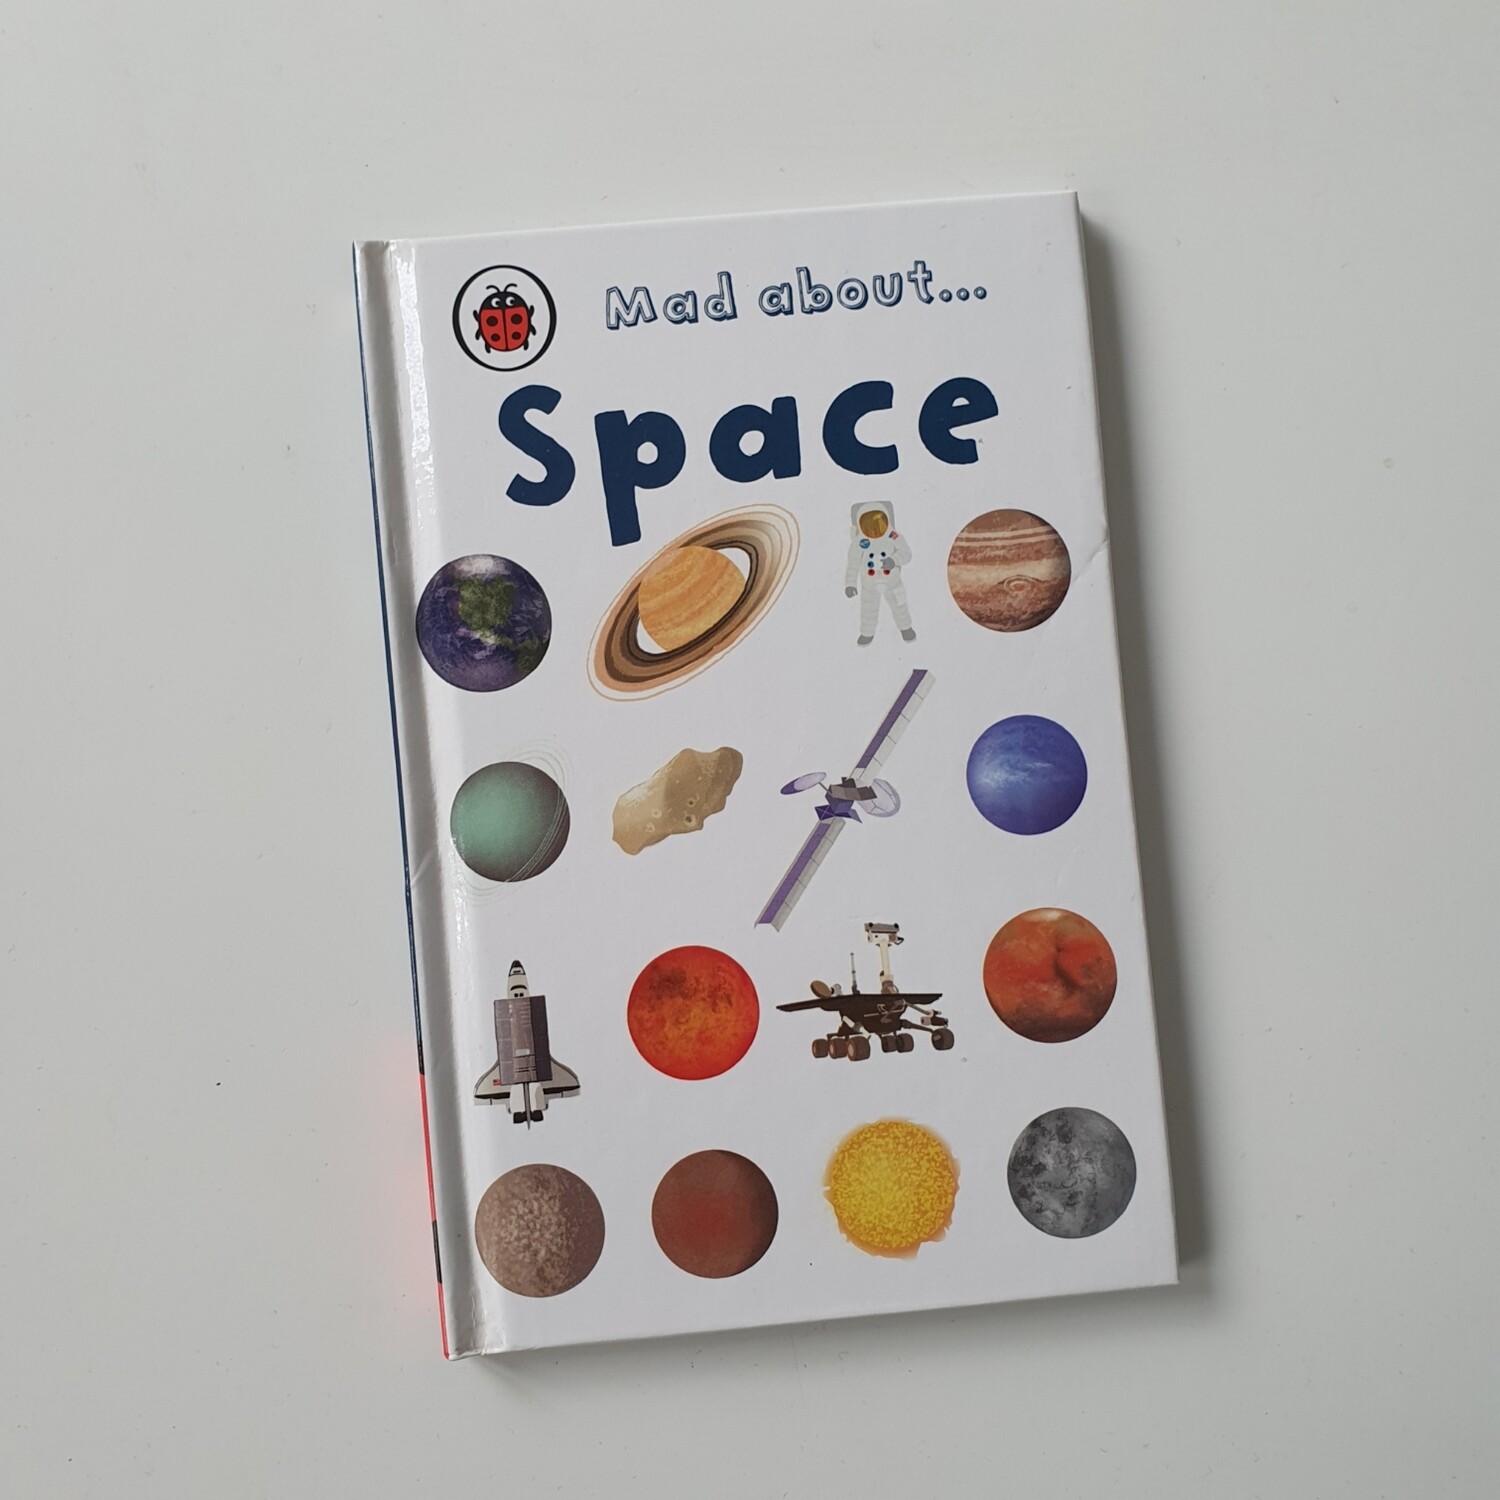 Mad about Space Notebook - Ladybird book - planets